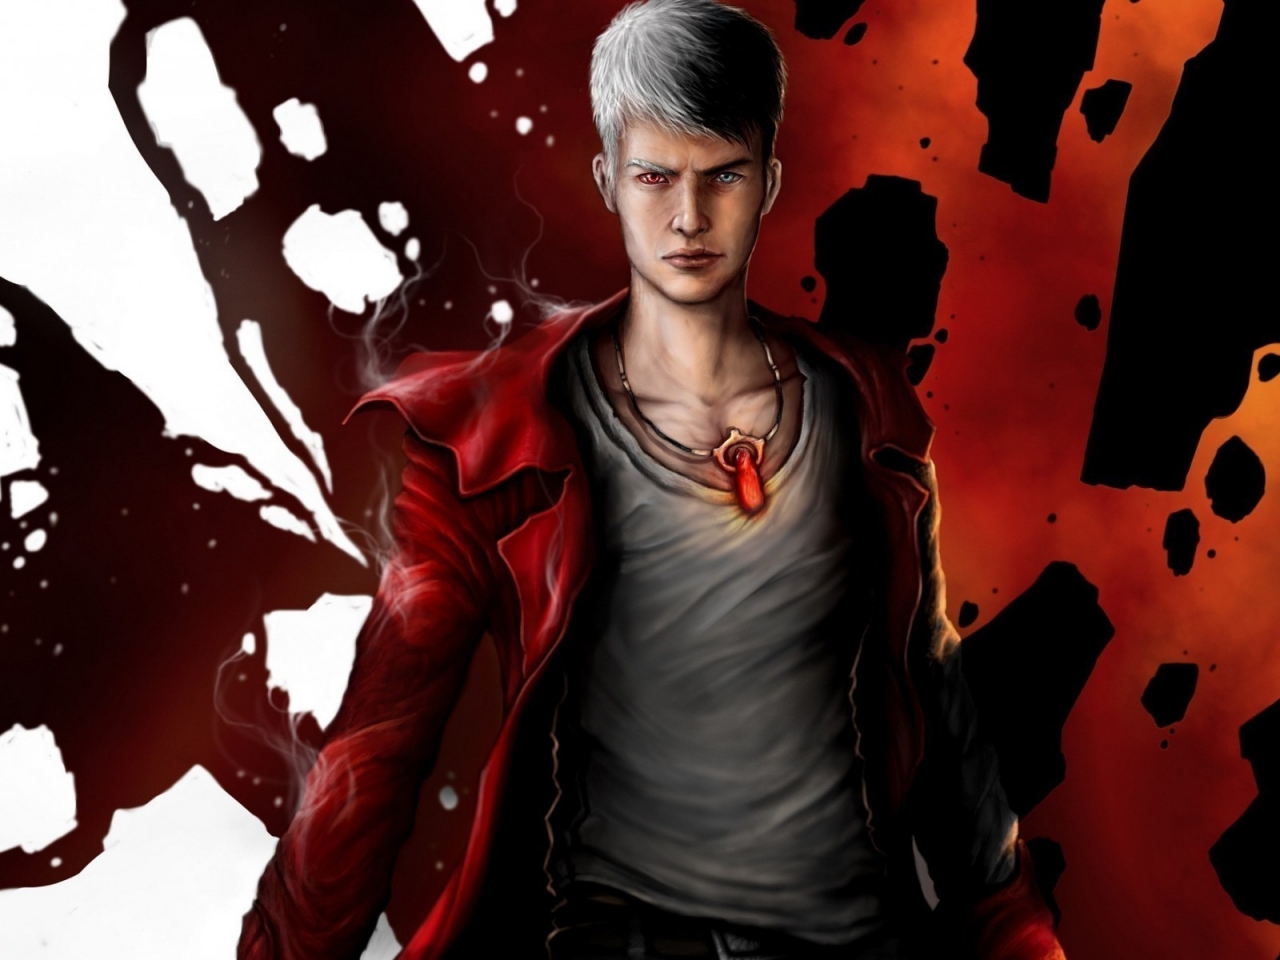 Dante Devil May Cry for 1280 x 960 resolution